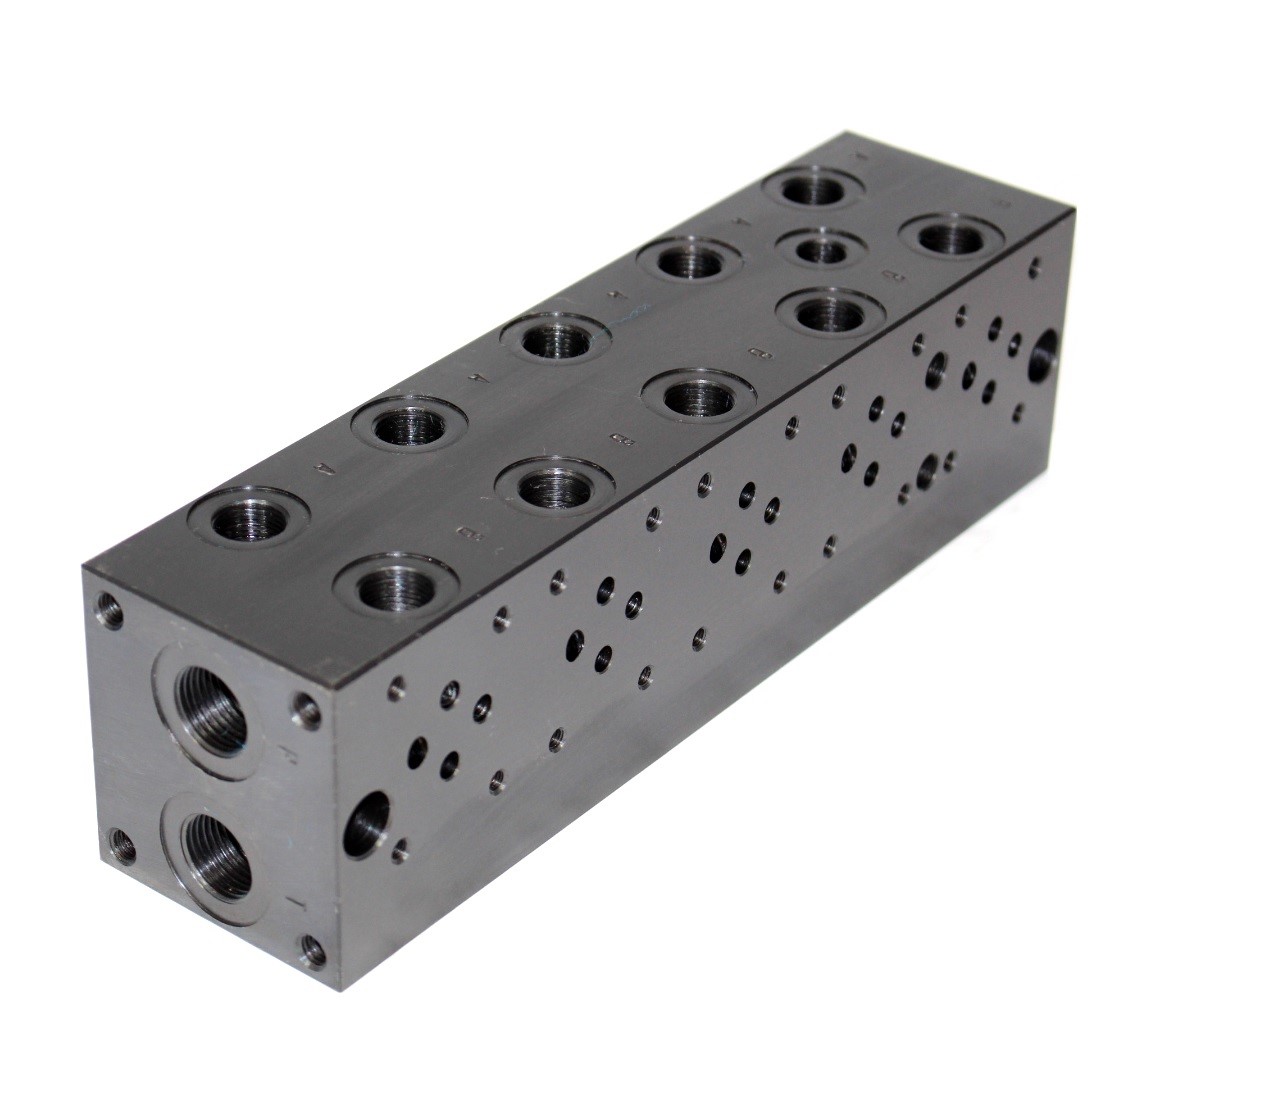 Flowfit cetop 3, 5 station steel manifold with relief valve cavity